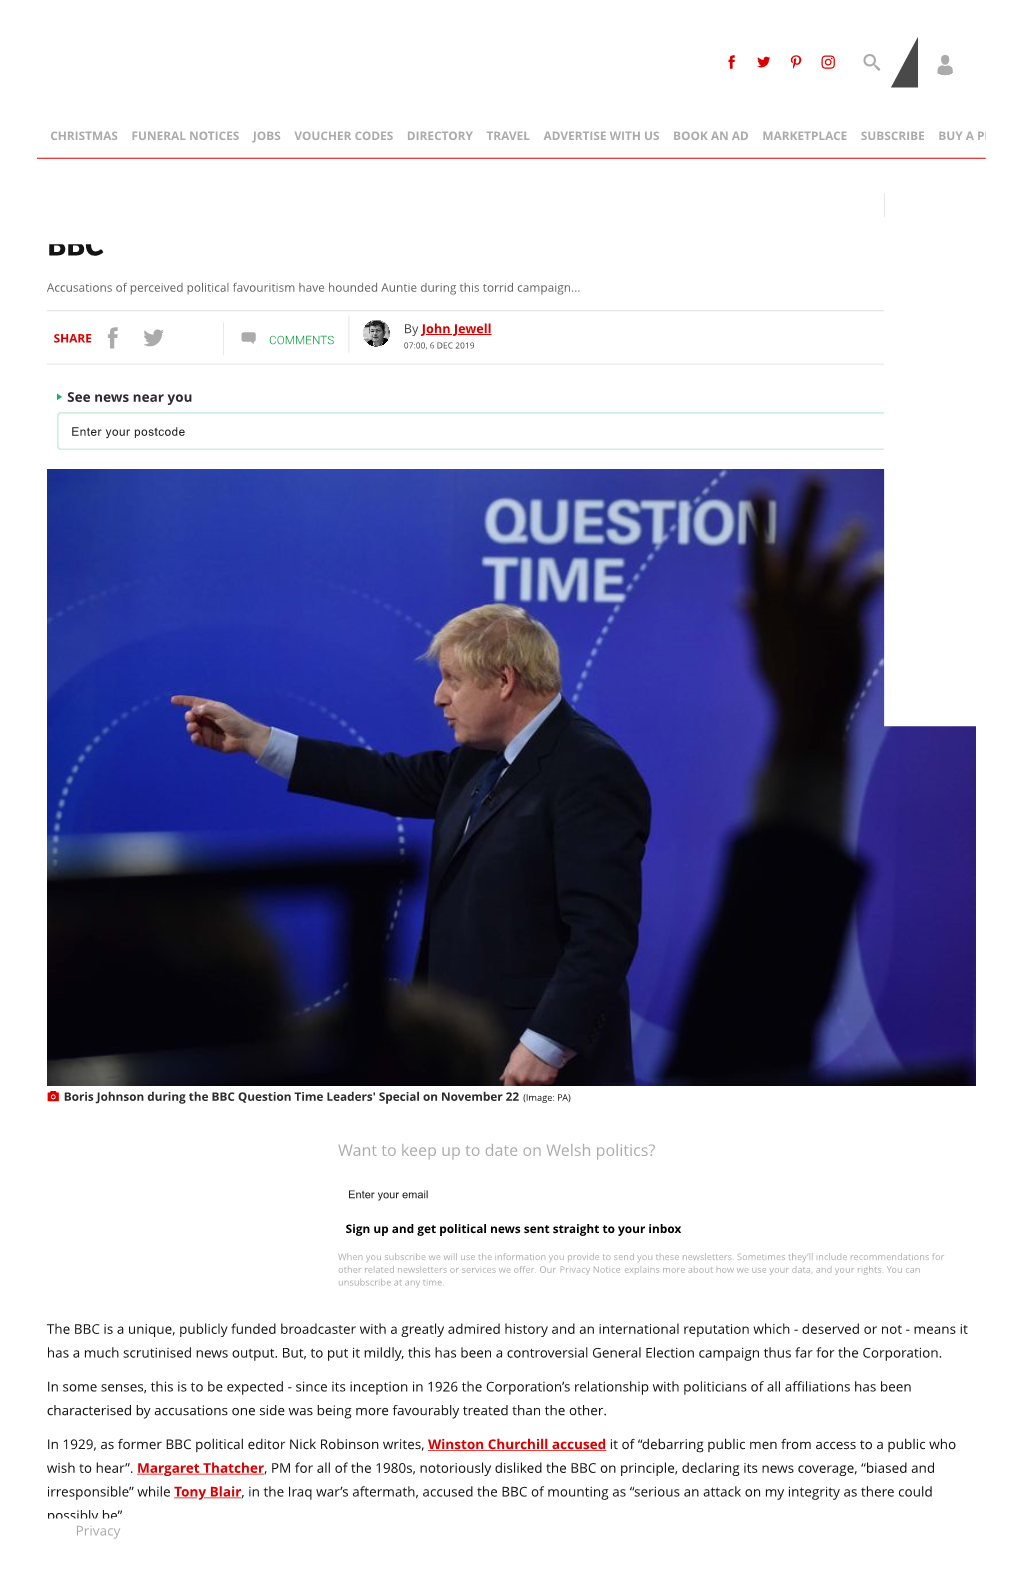 OPINION How General Election 2019 Has Proved Controversial for the BBC